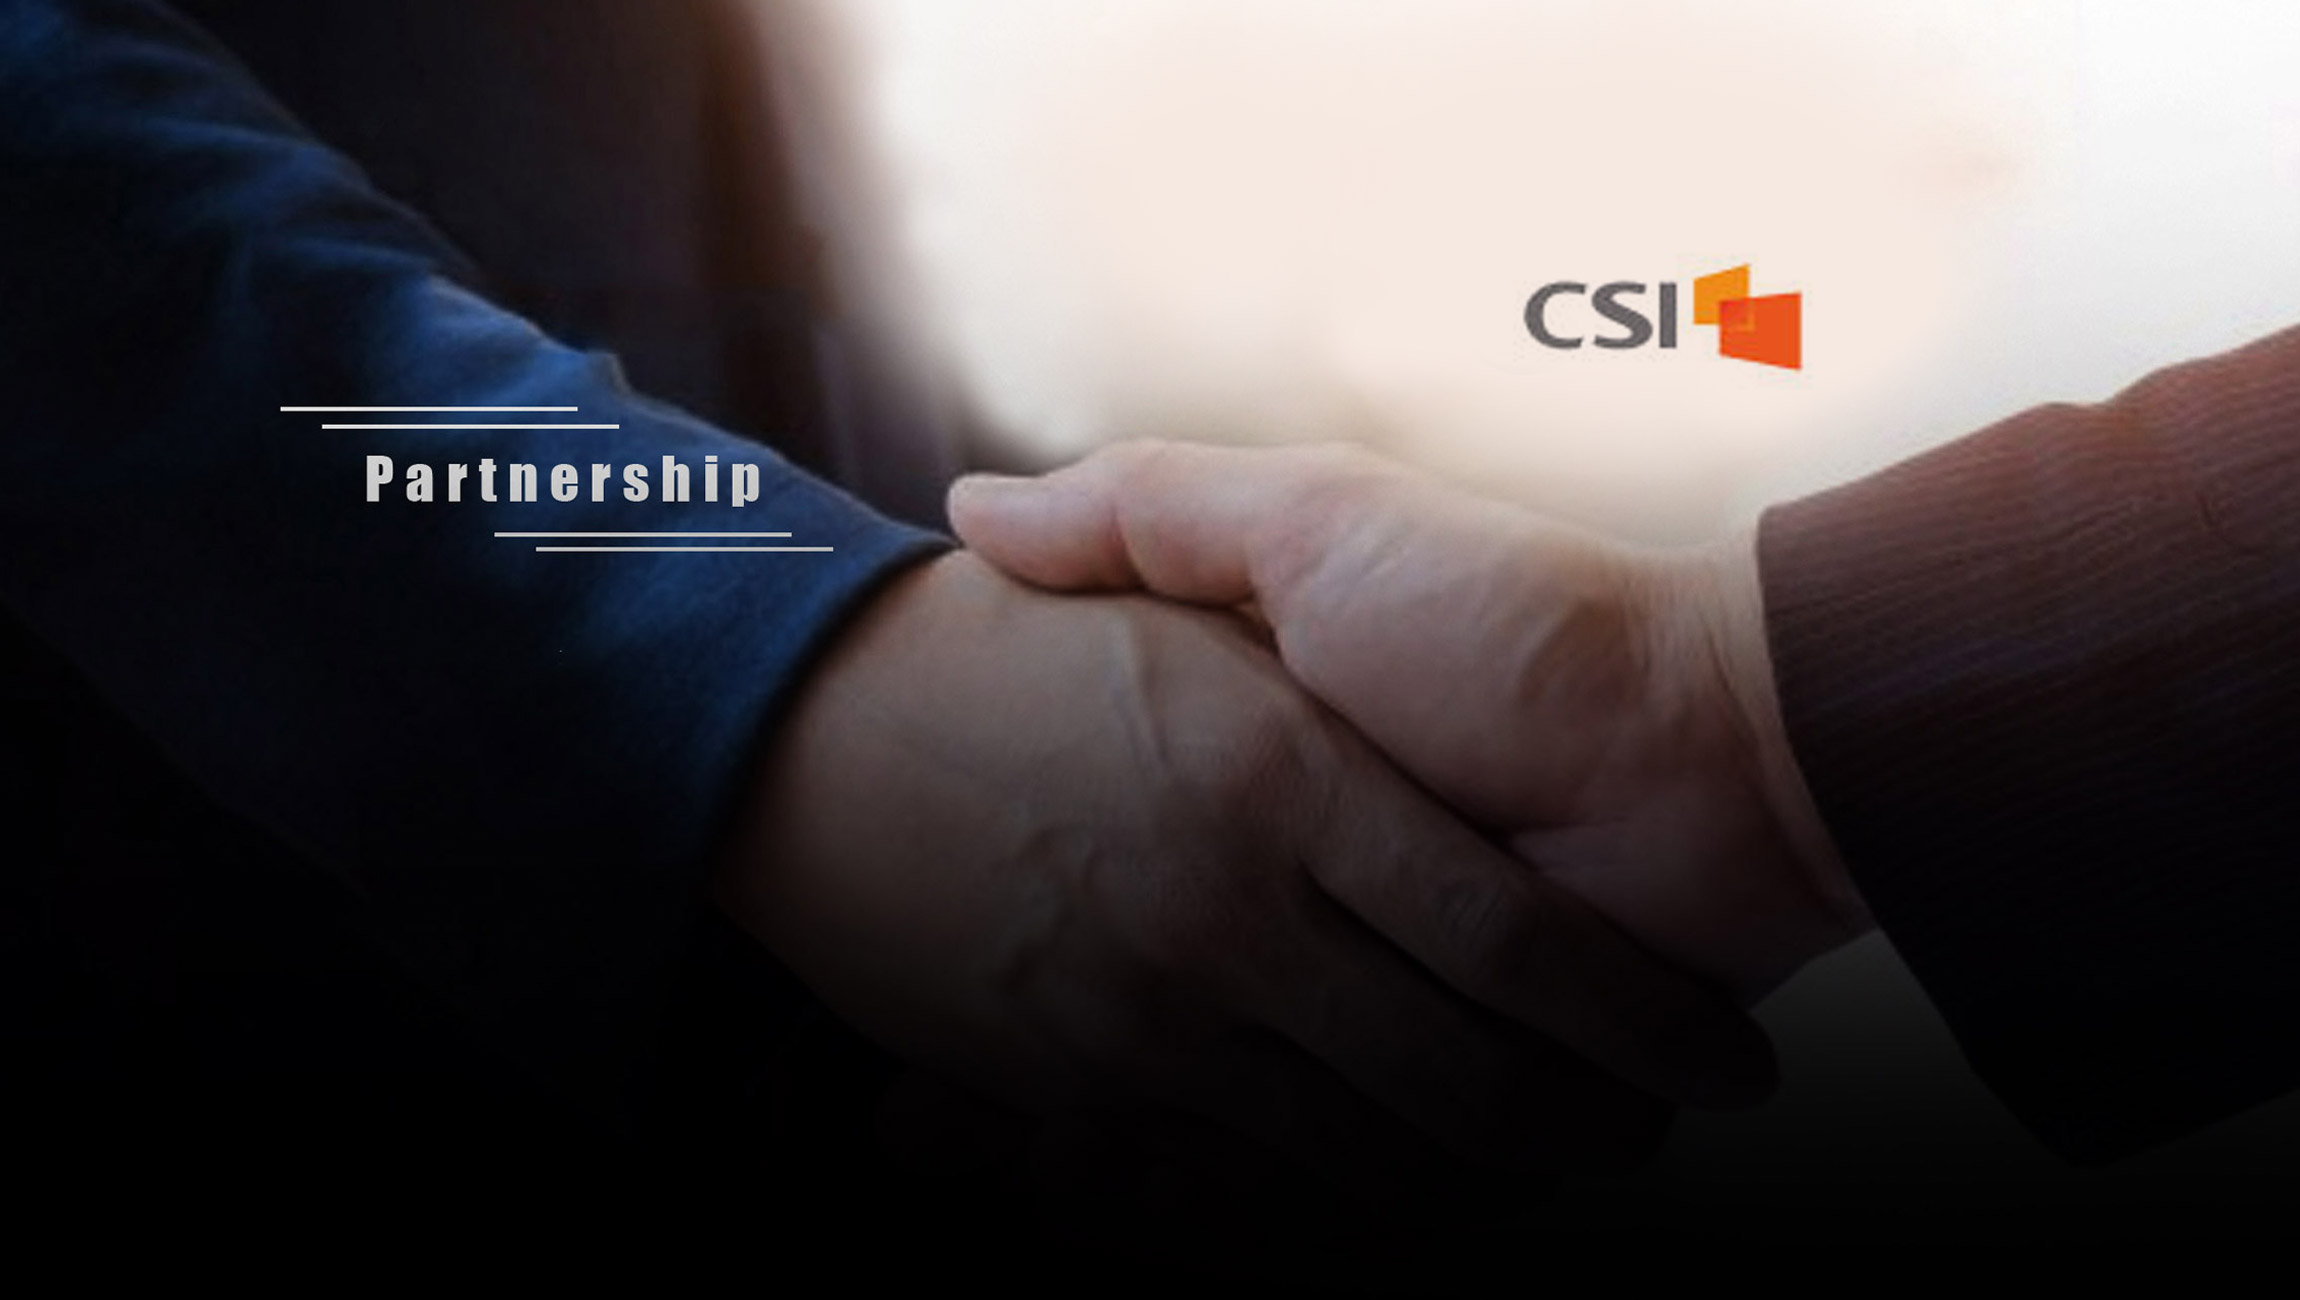 CSI Partners with Arctic Intelligence to Provide Powerful Enterprise Risk Assessment Solutions